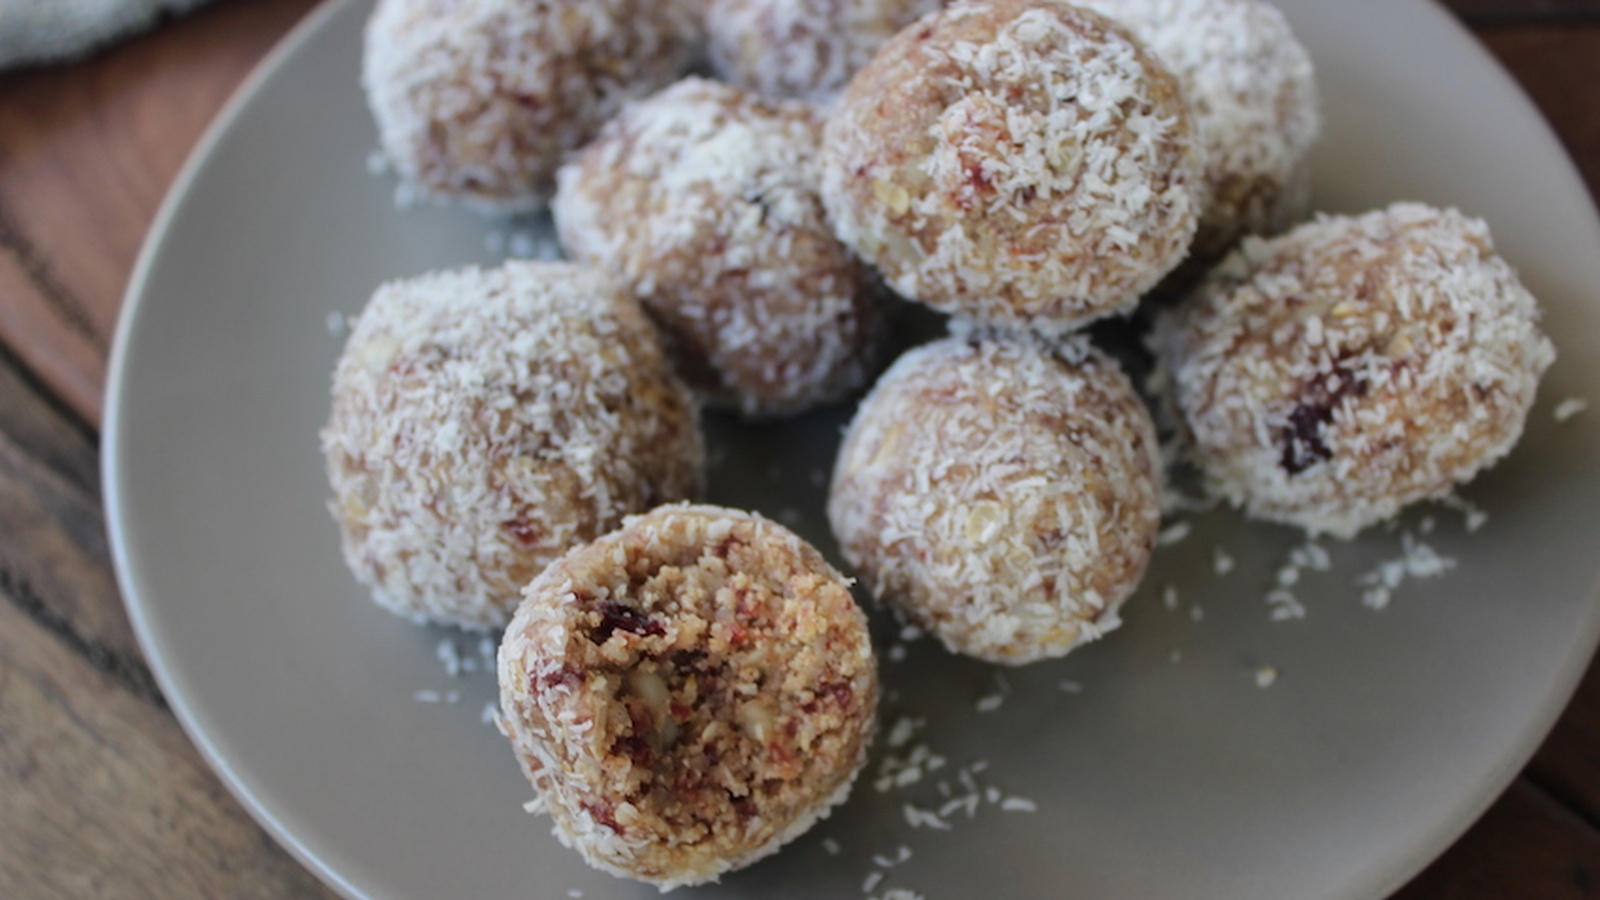 Cranberry and Macadamia Bliss Balls